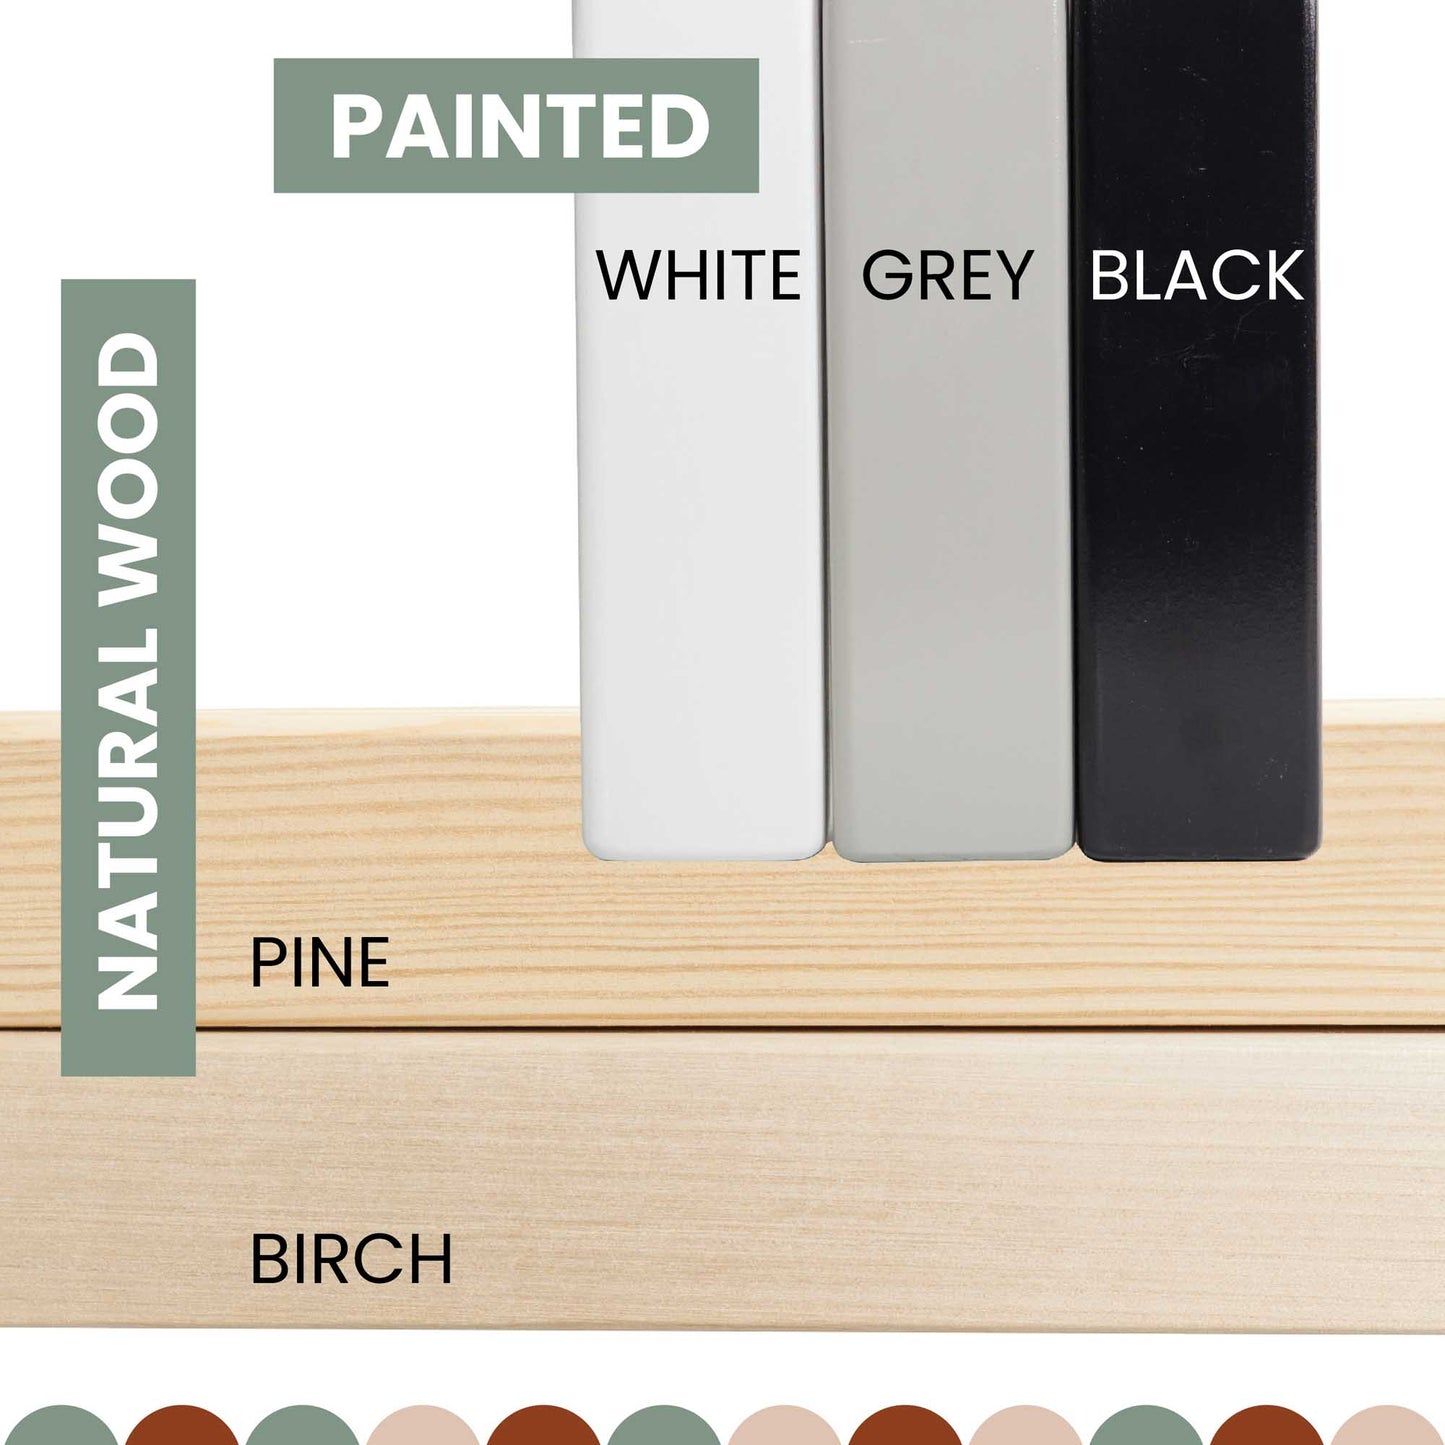 The paint colors for a Wooden house bed on legs with a fence in pine, birch, and white.